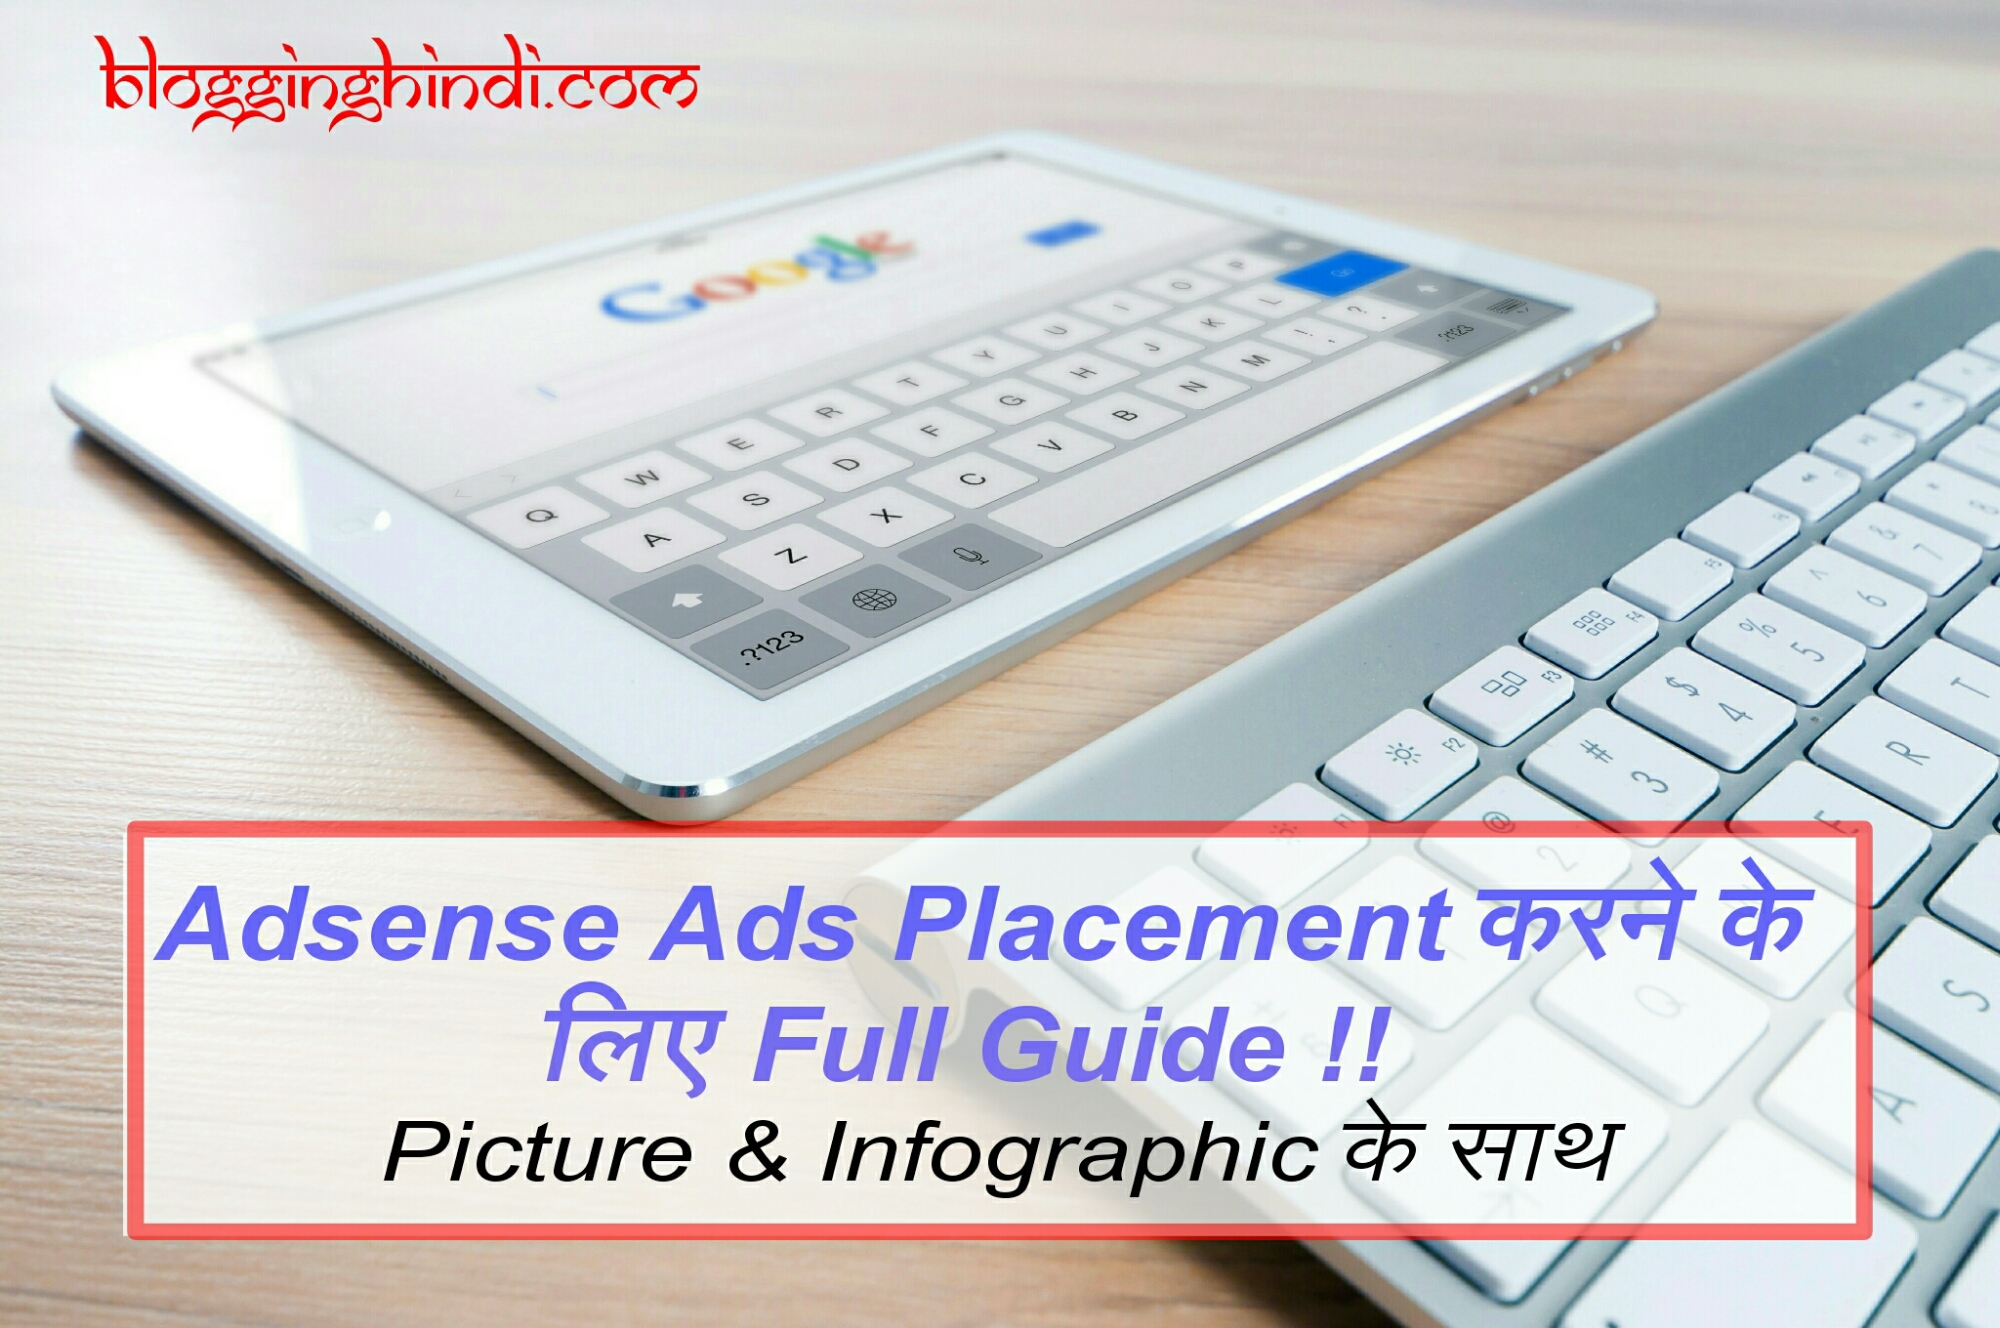 Blog me Adsense Ads Kaha Kaha Dikhaye full guide Adsense Ads Placement Full Guide With Infographic